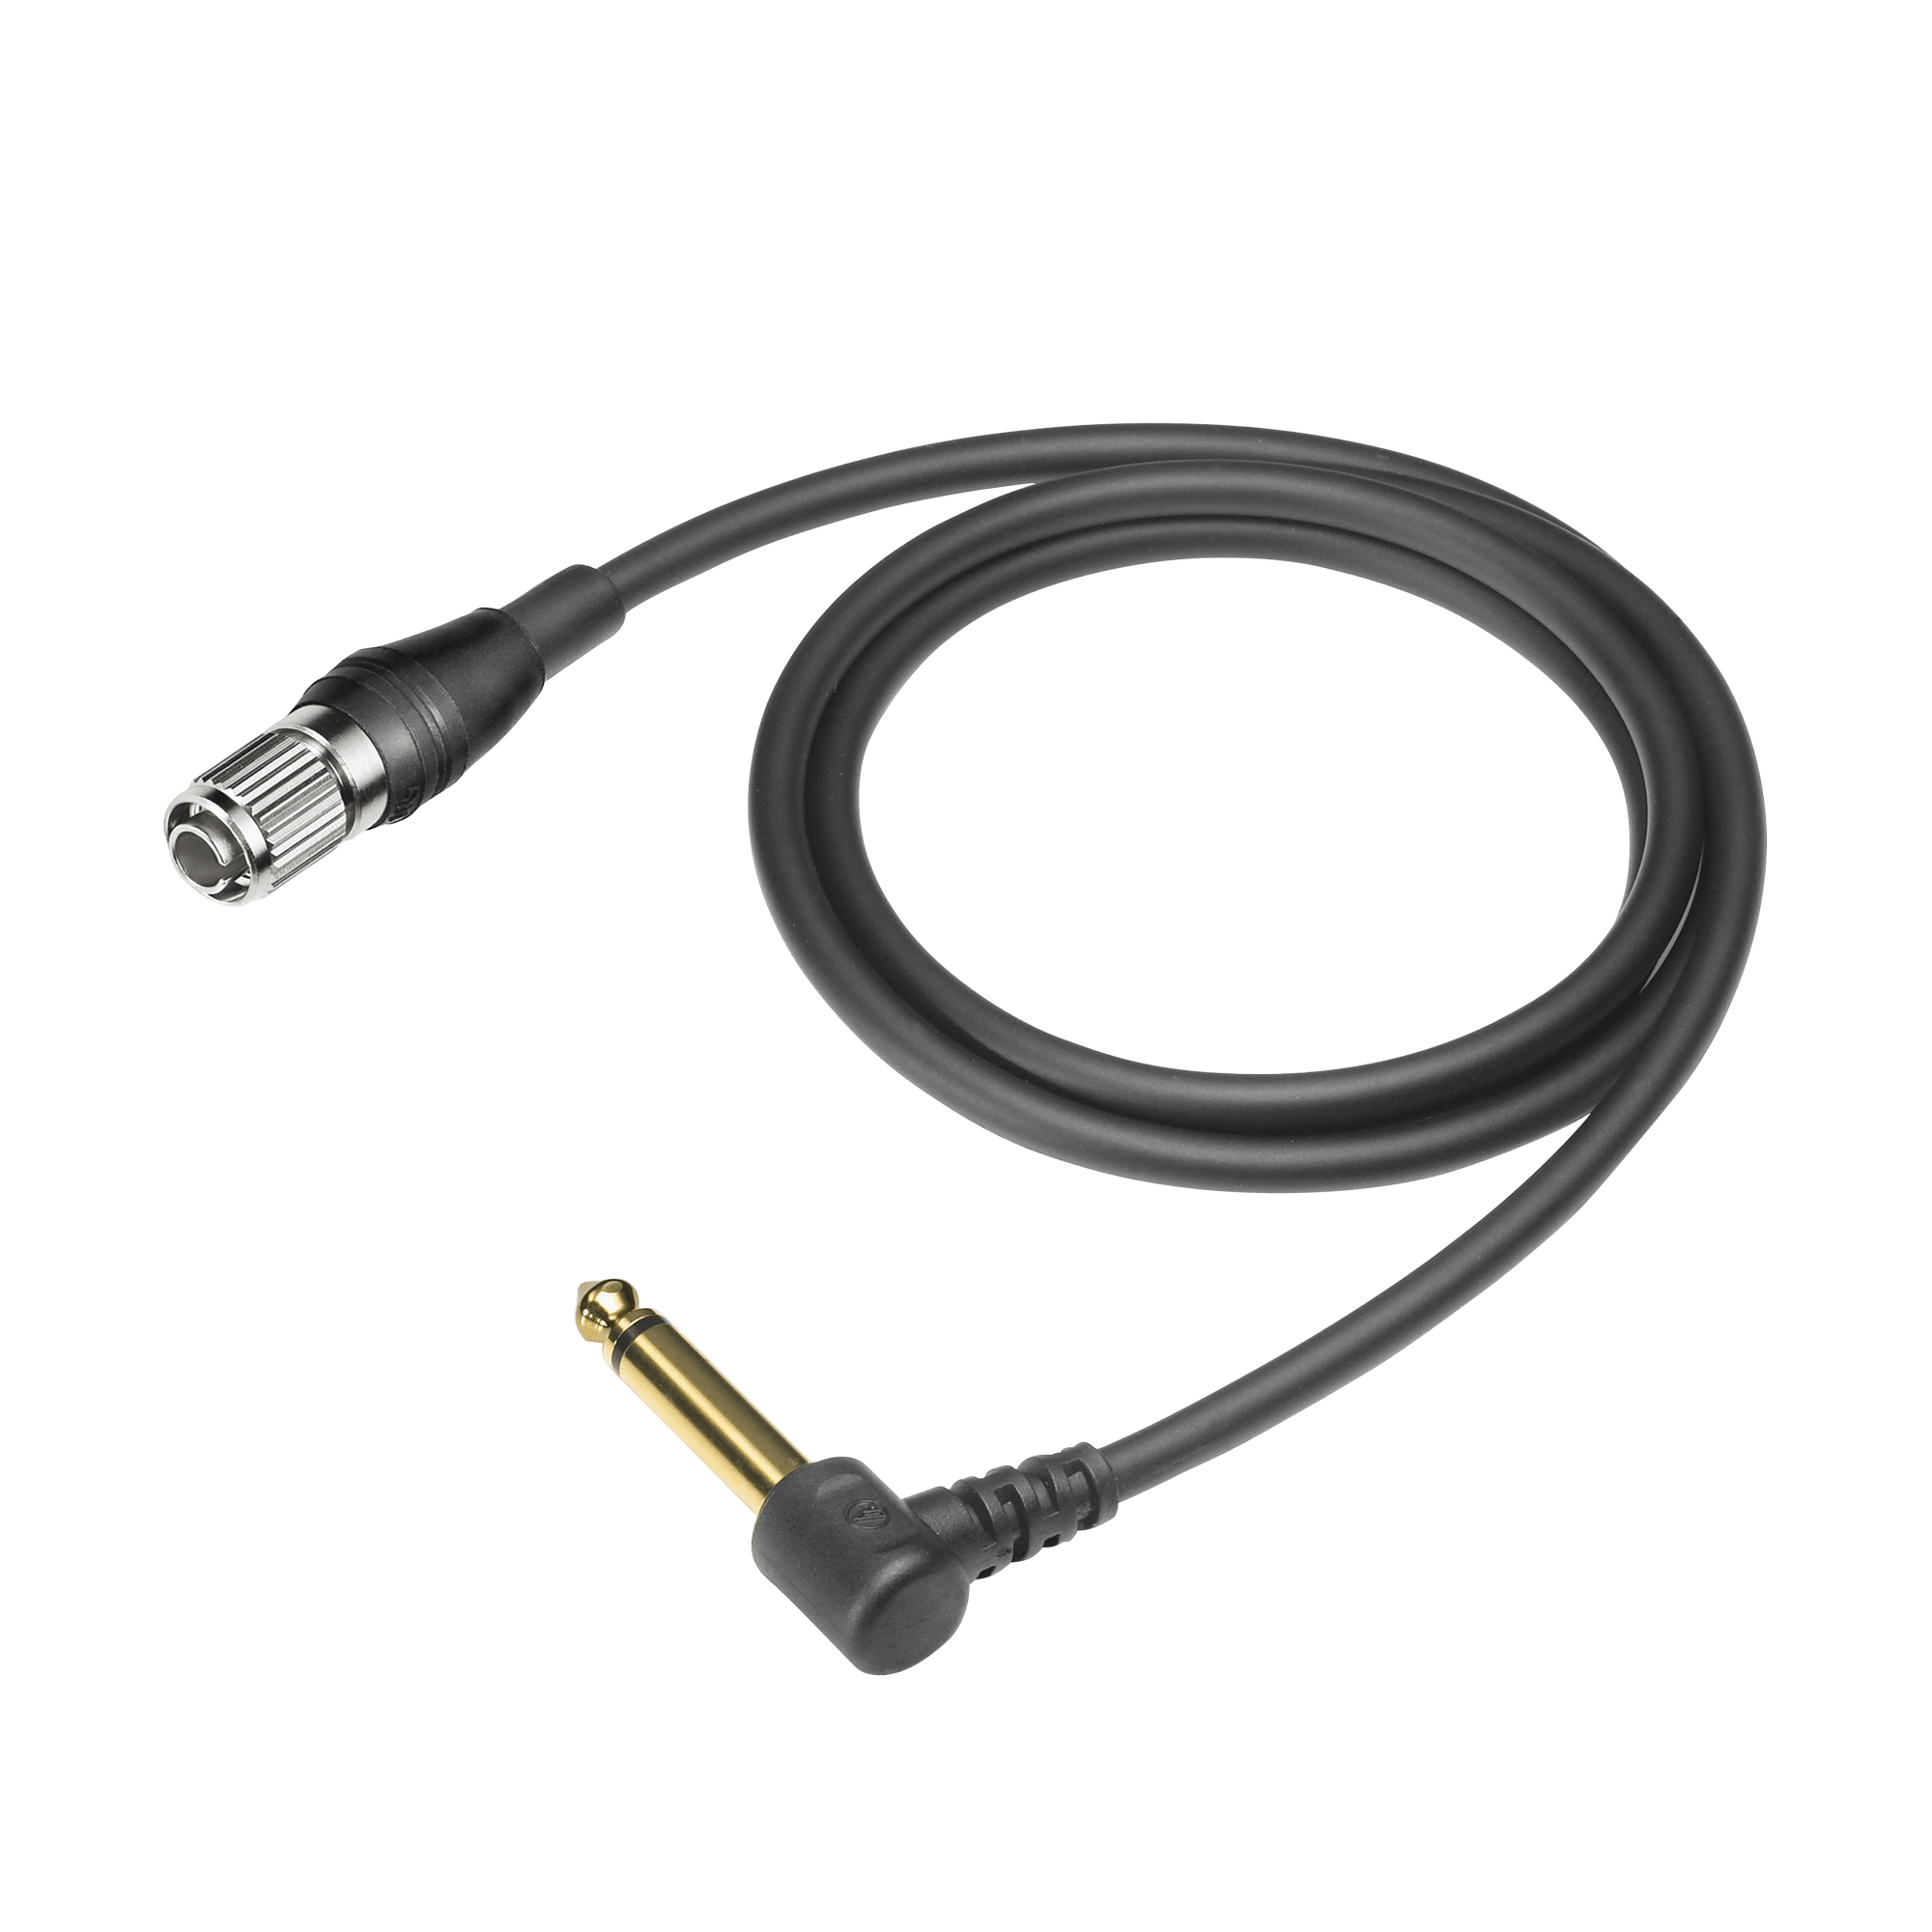 AT-GRcH - Guitar Input Cable for Wireless | Audio-Technica